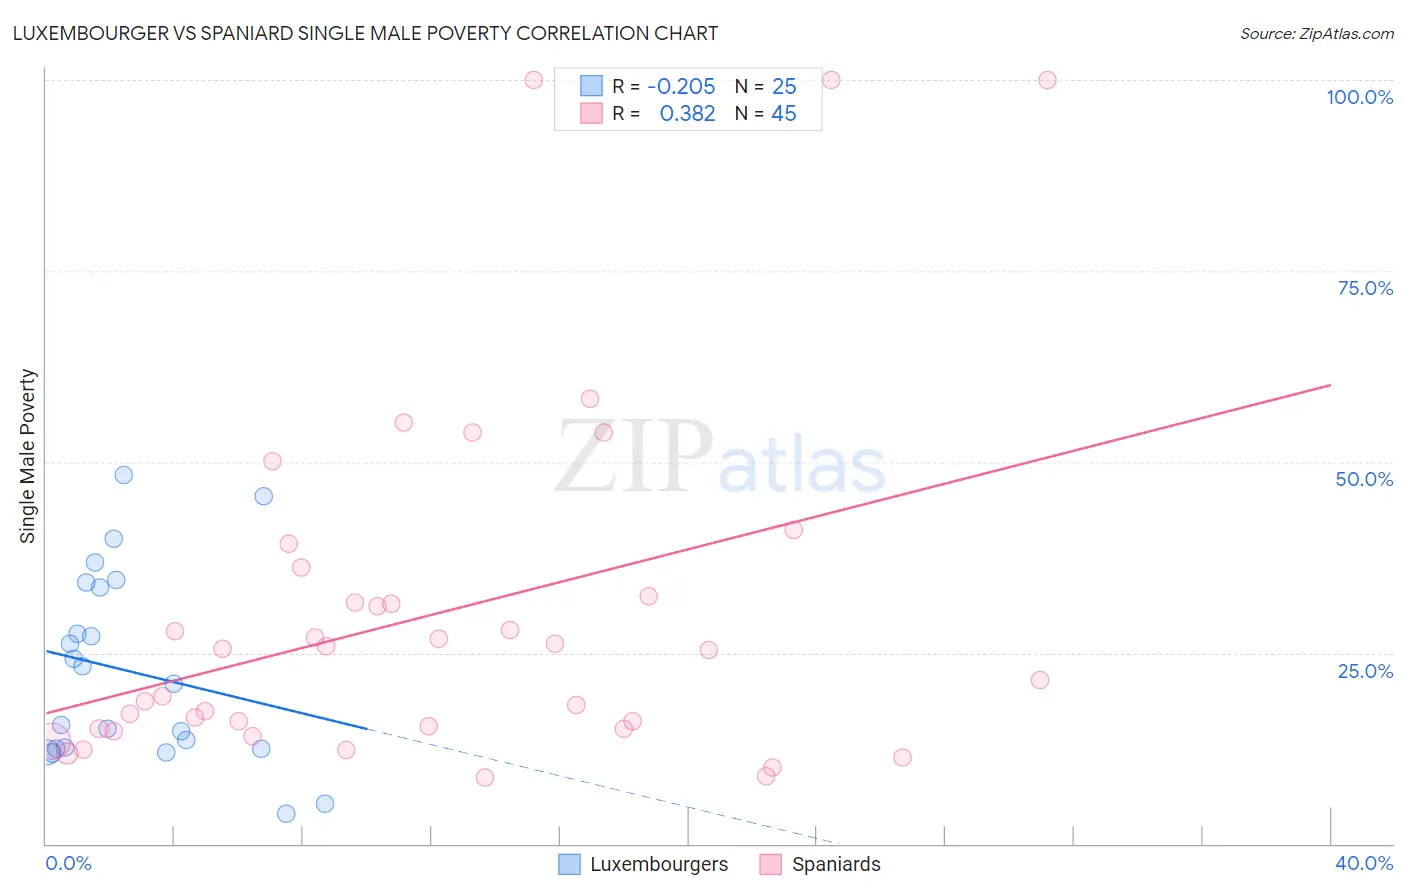 Luxembourger vs Spaniard Single Male Poverty